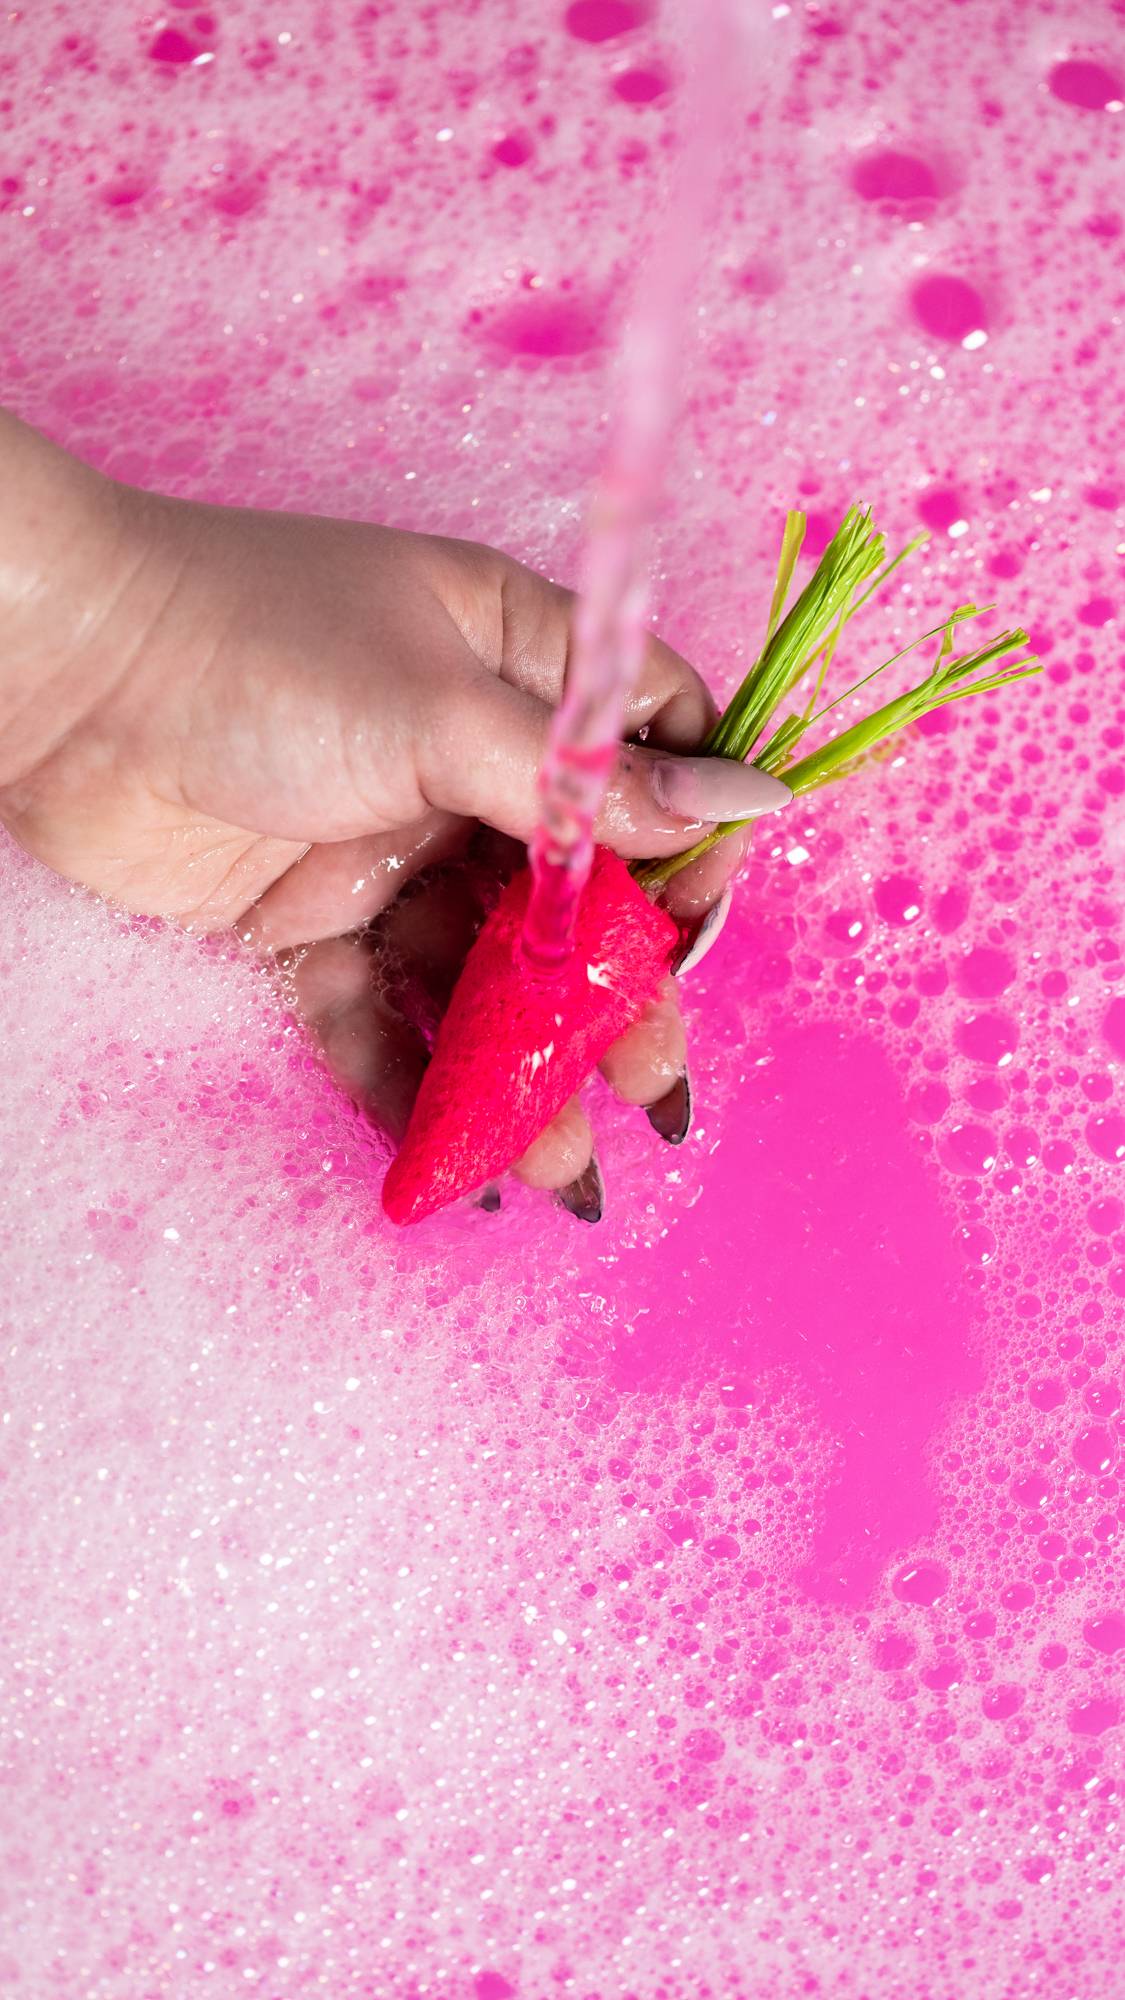 A close-up image of the model's hand holding the pink carrot bubble bar under running water creates a deep pink, bubbly bath. 